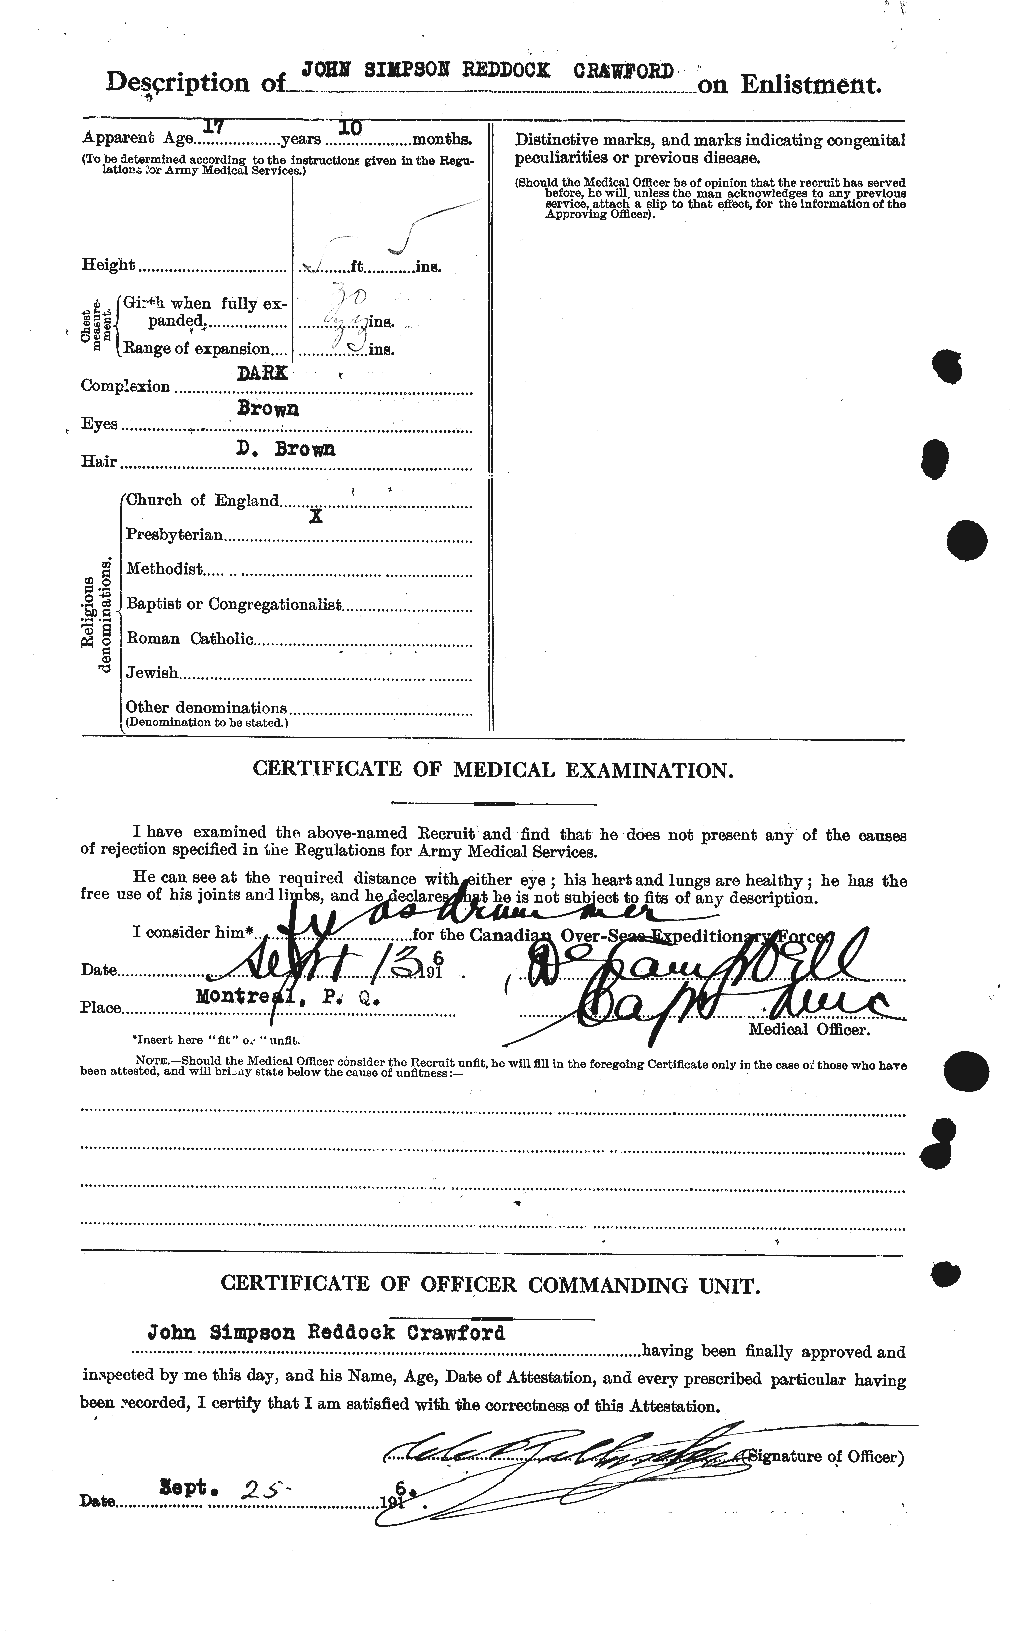 Personnel Records of the First World War - CEF 061824b